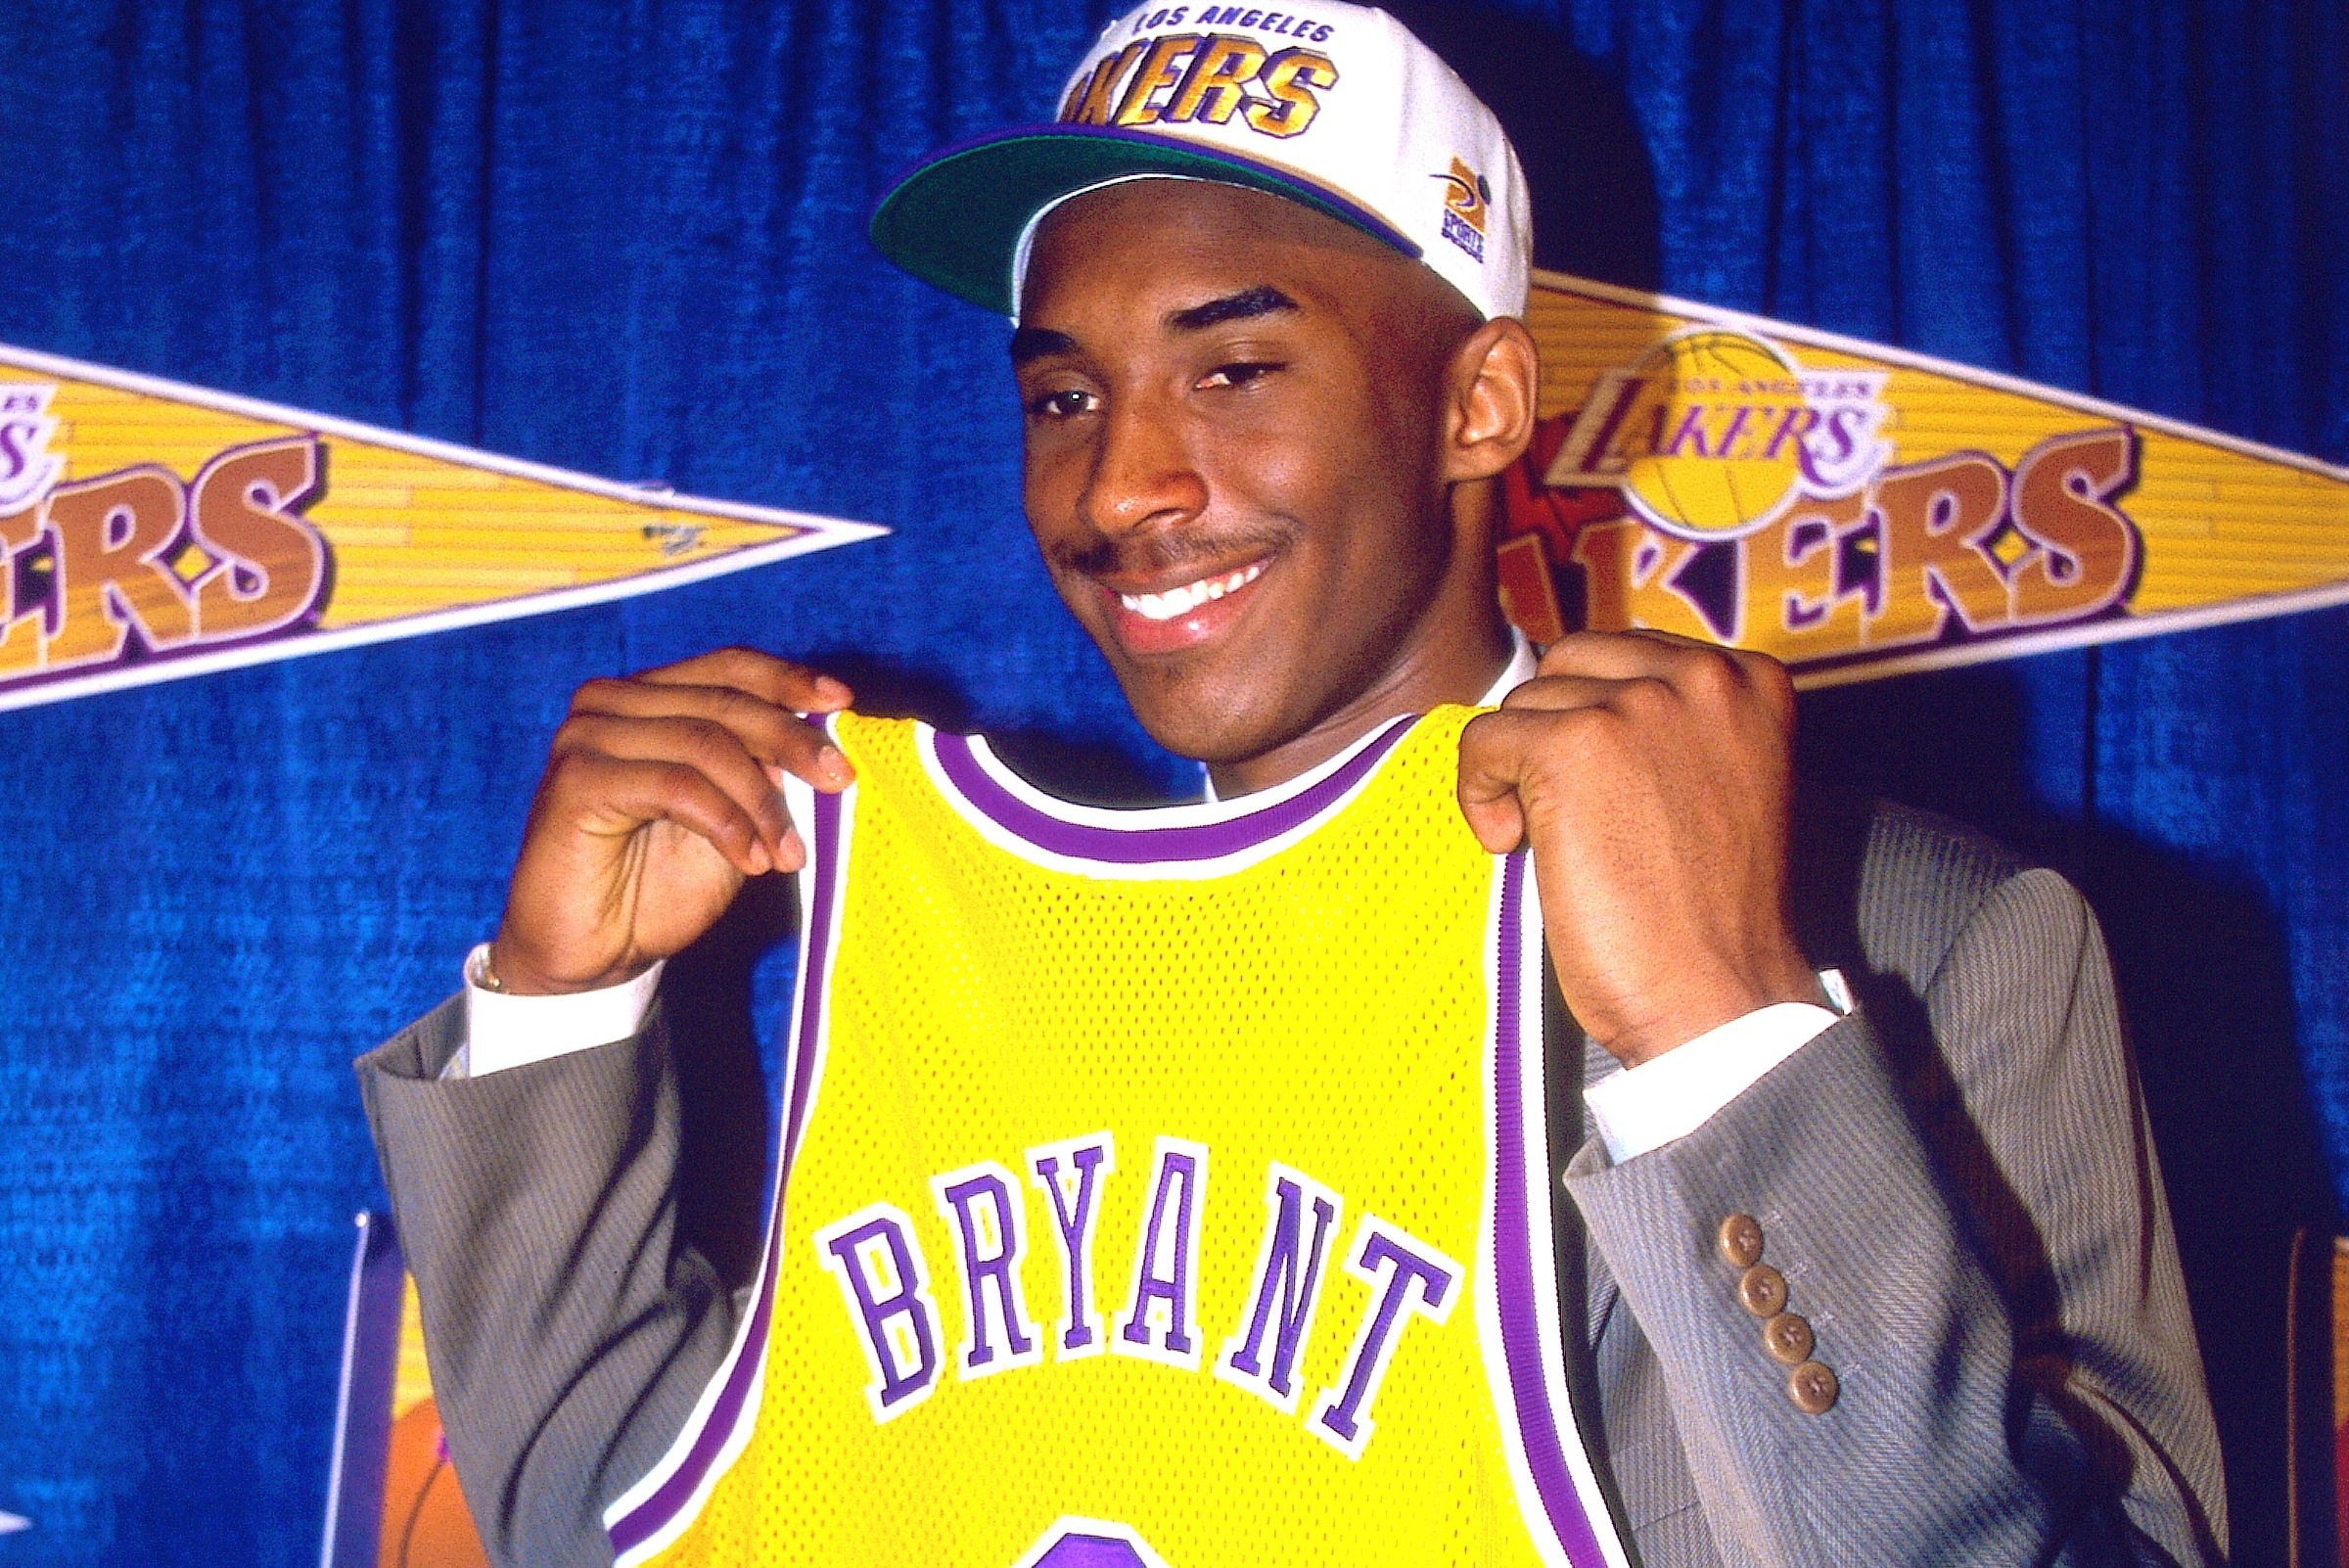 Kobe Bryant All That's Left of NBA's Greatest Draft Ever